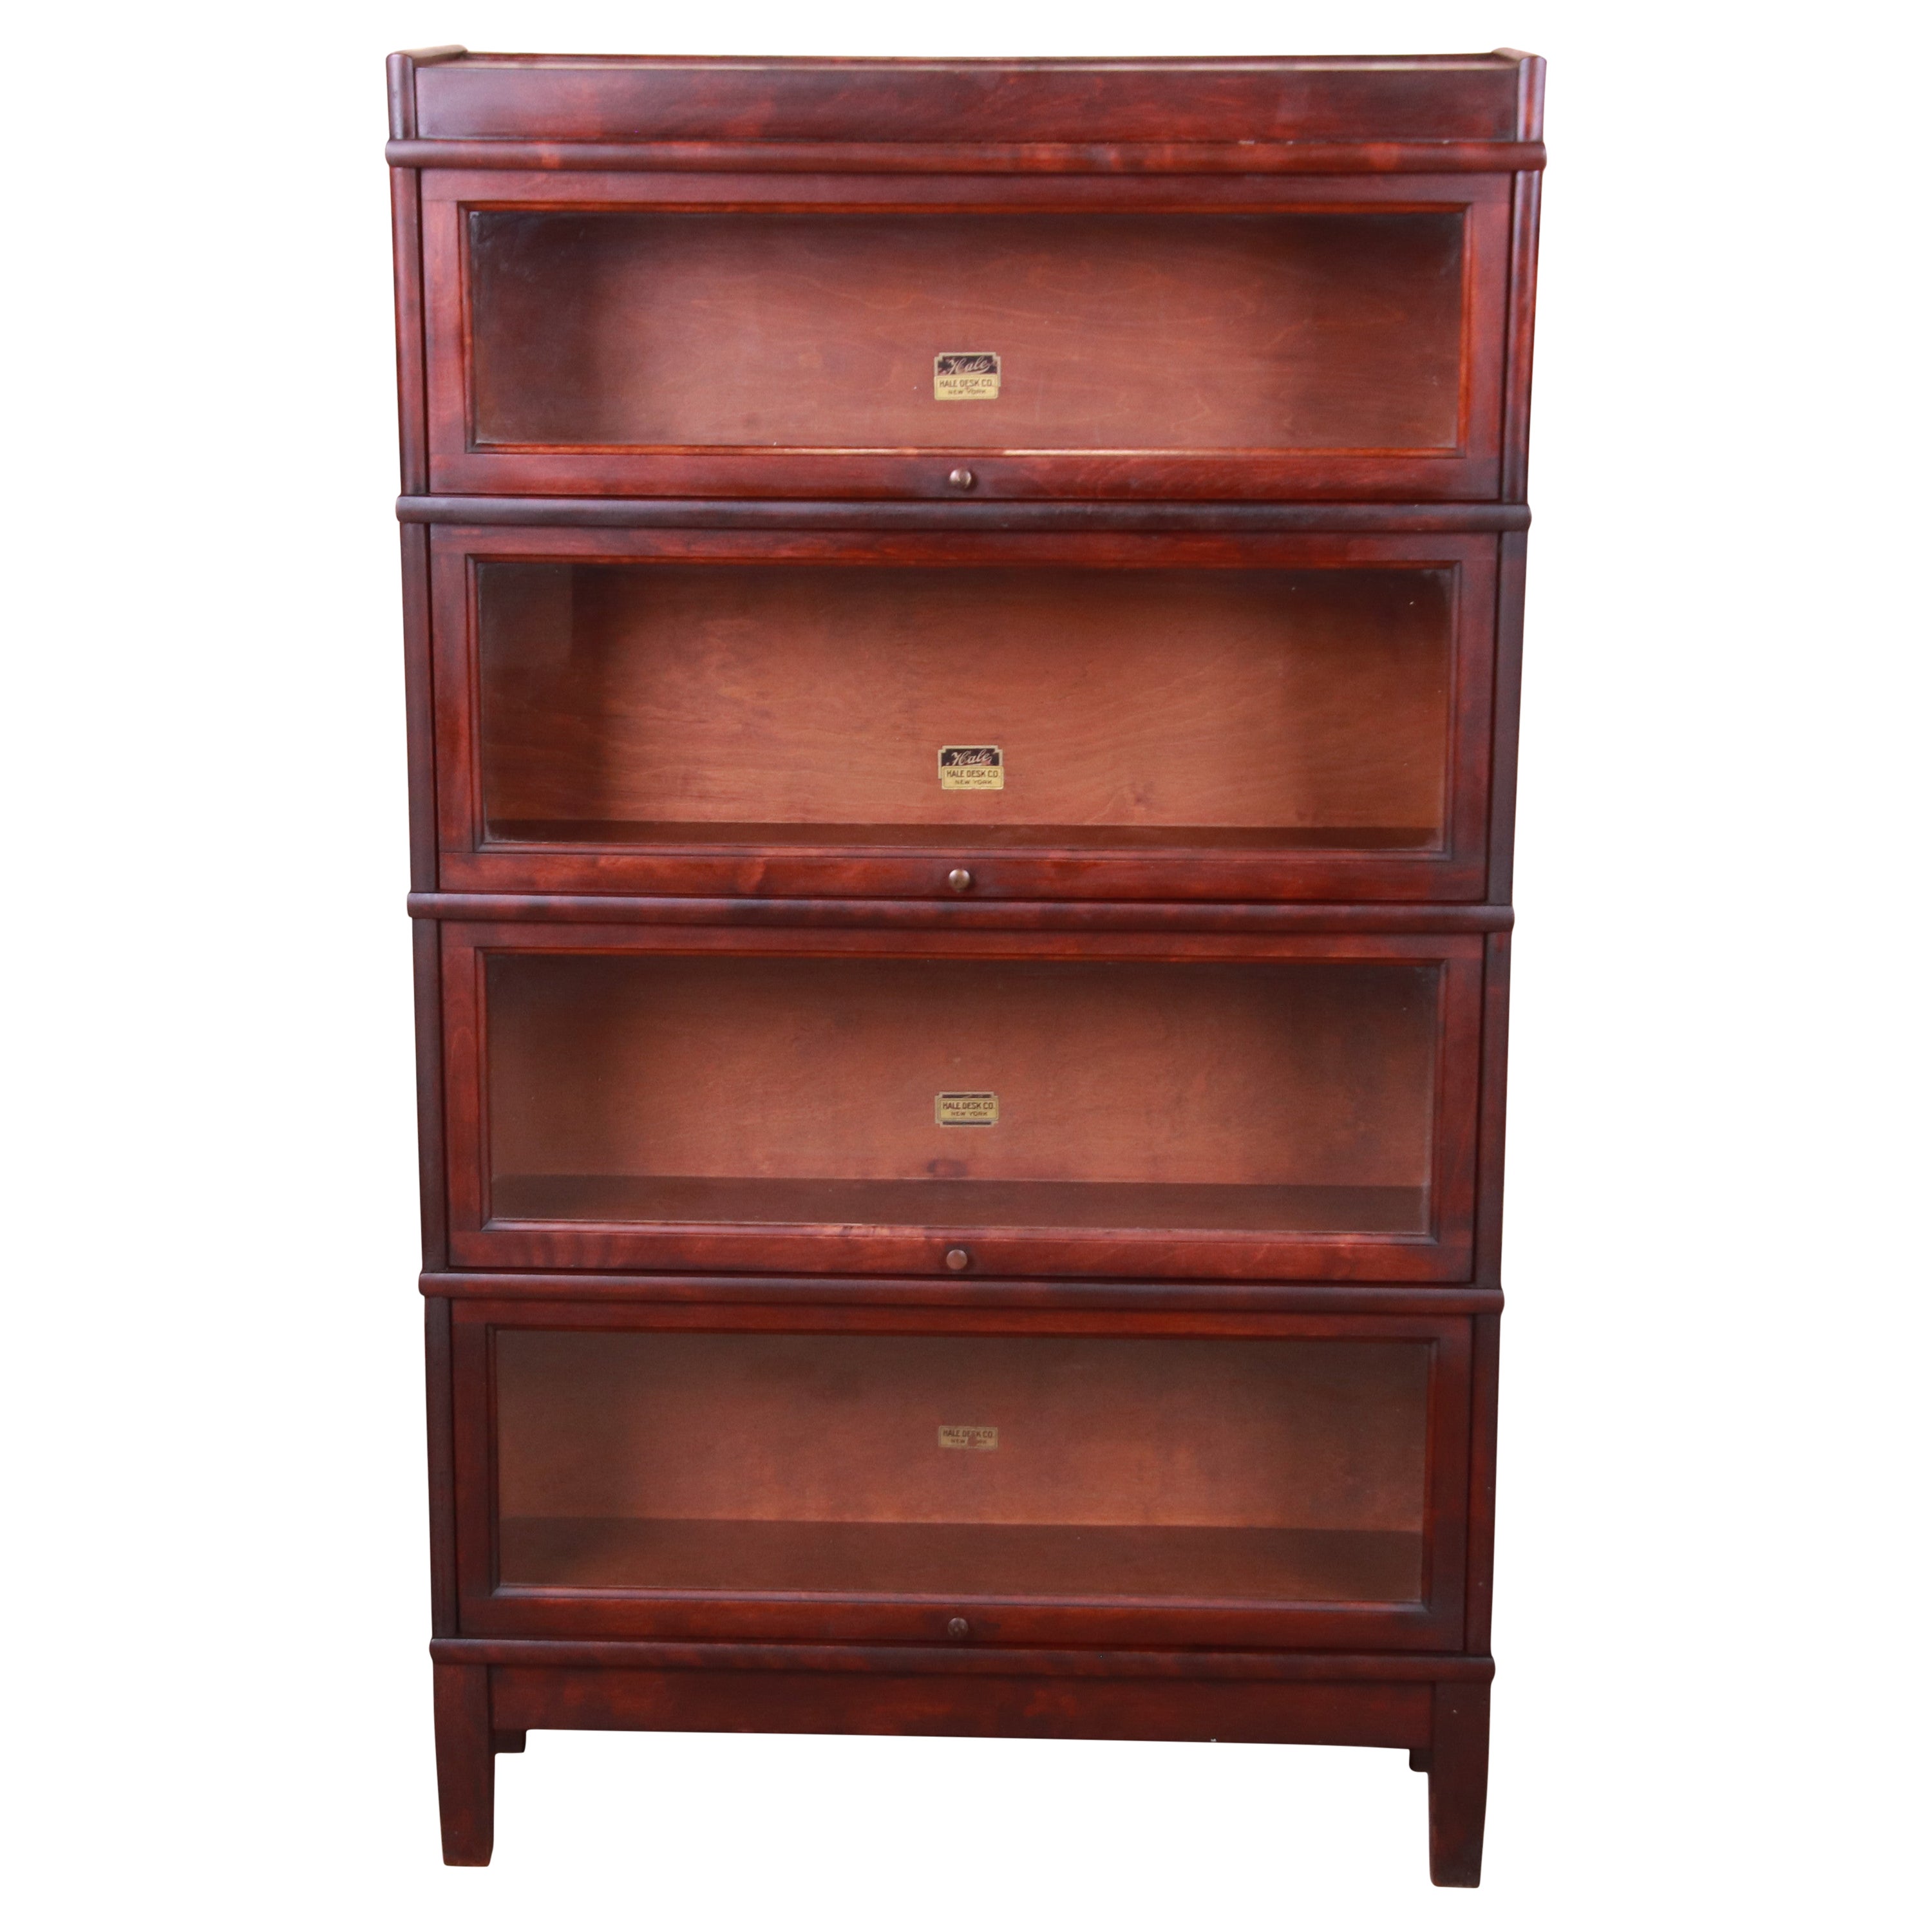 Antique Mahogany Four-Stack Barrister Bookcase by Hale, Circa 1920s